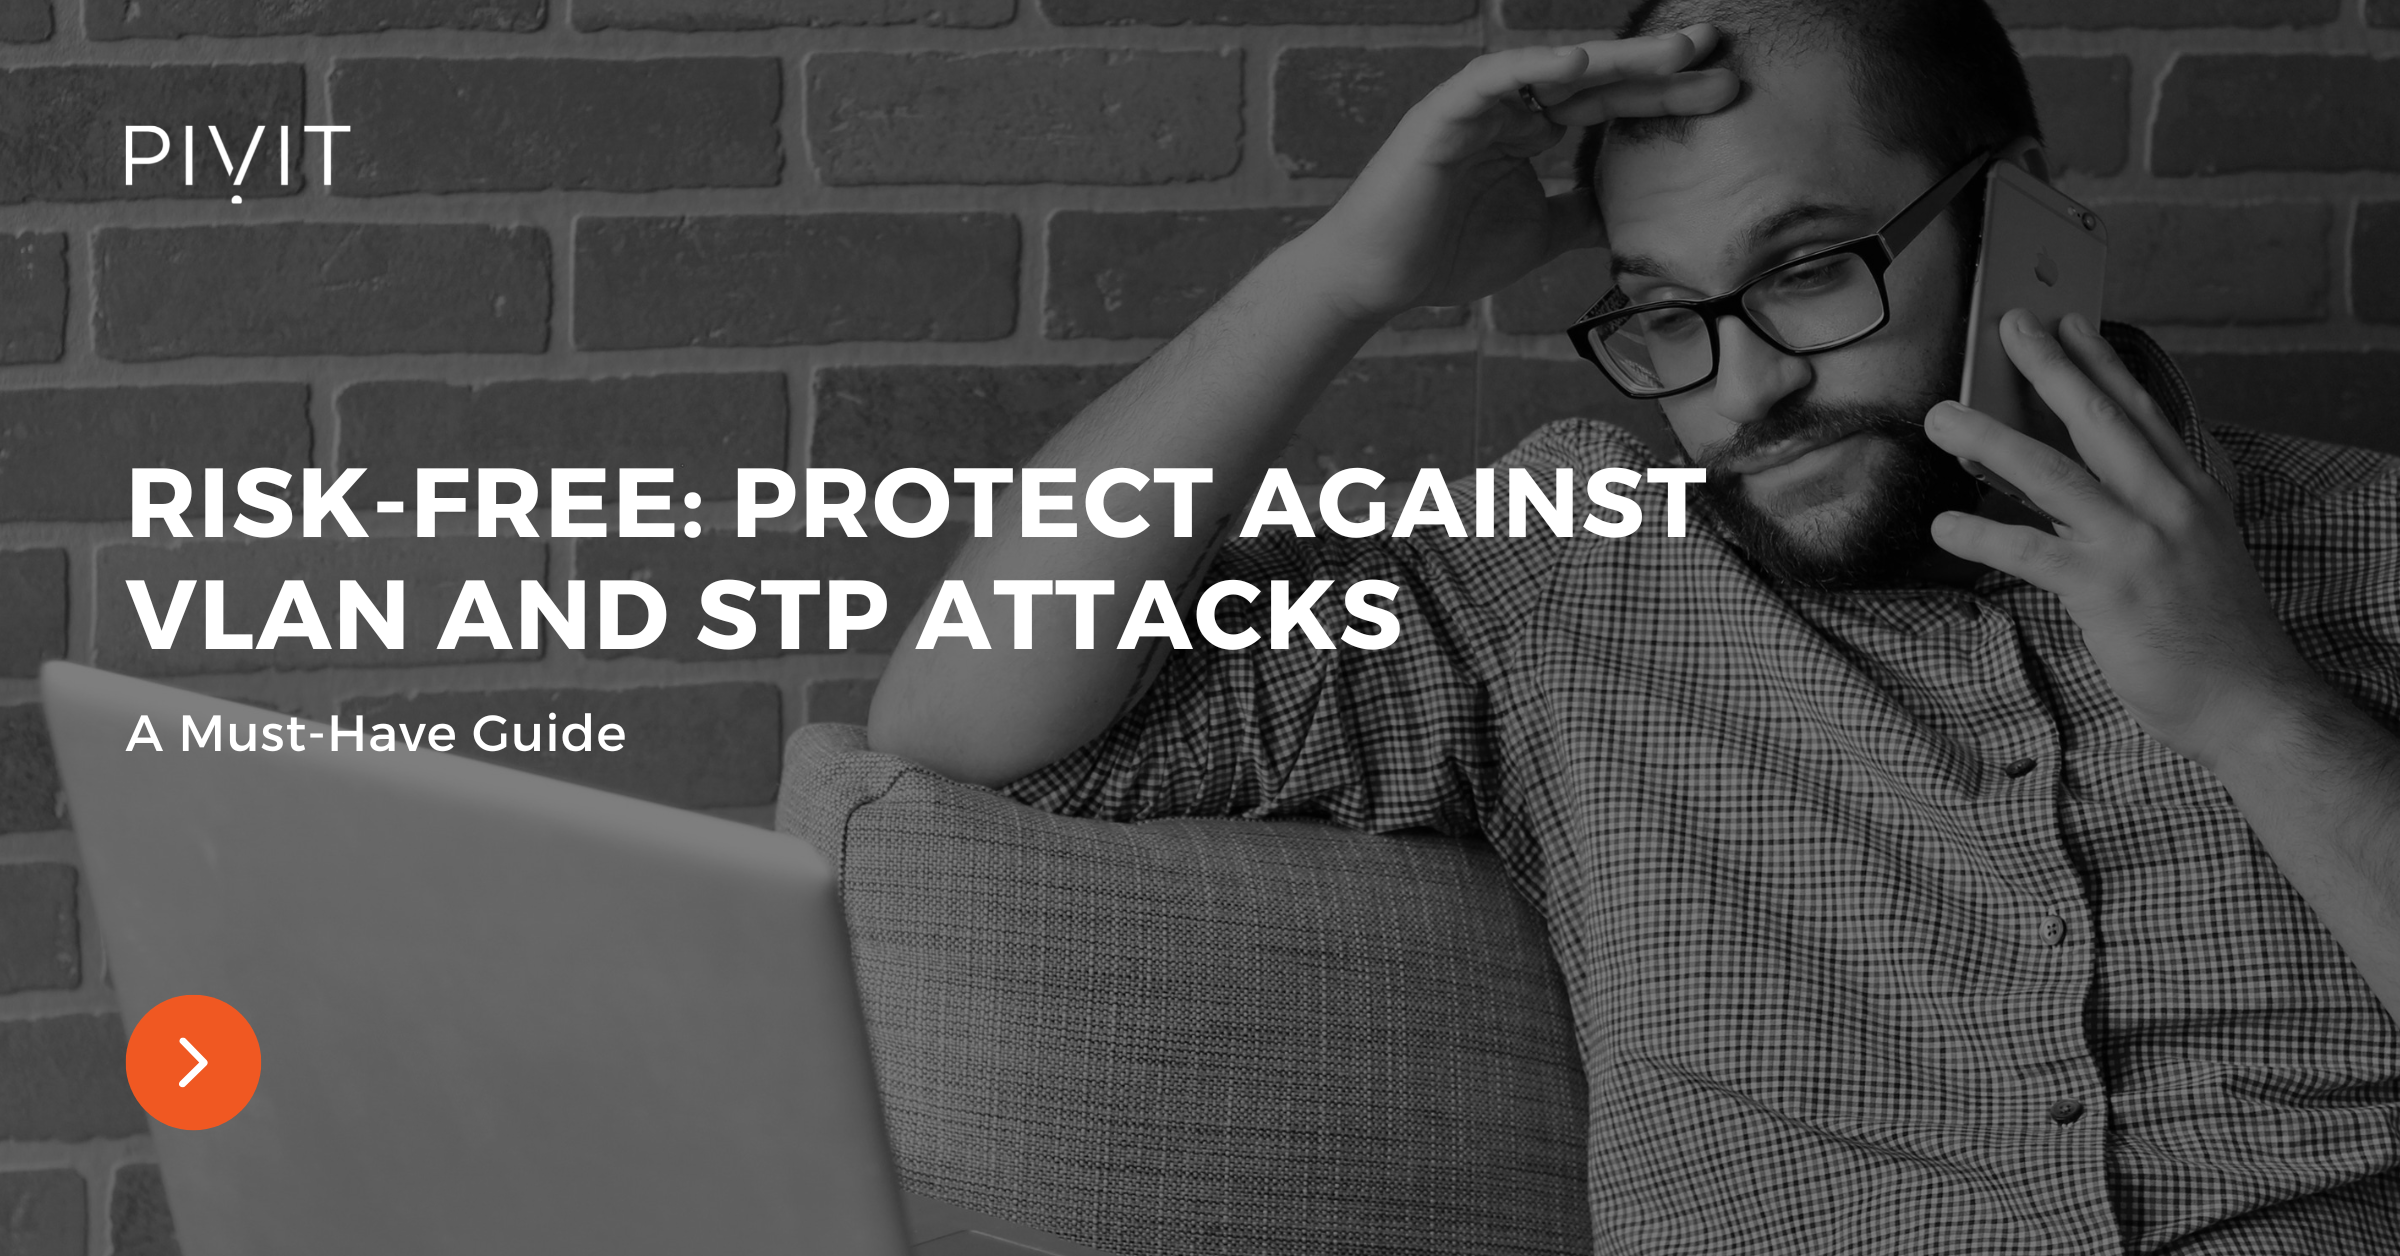 A Must-Have Guide - Risk-Free: Protect Against VLAN and STP Attacks